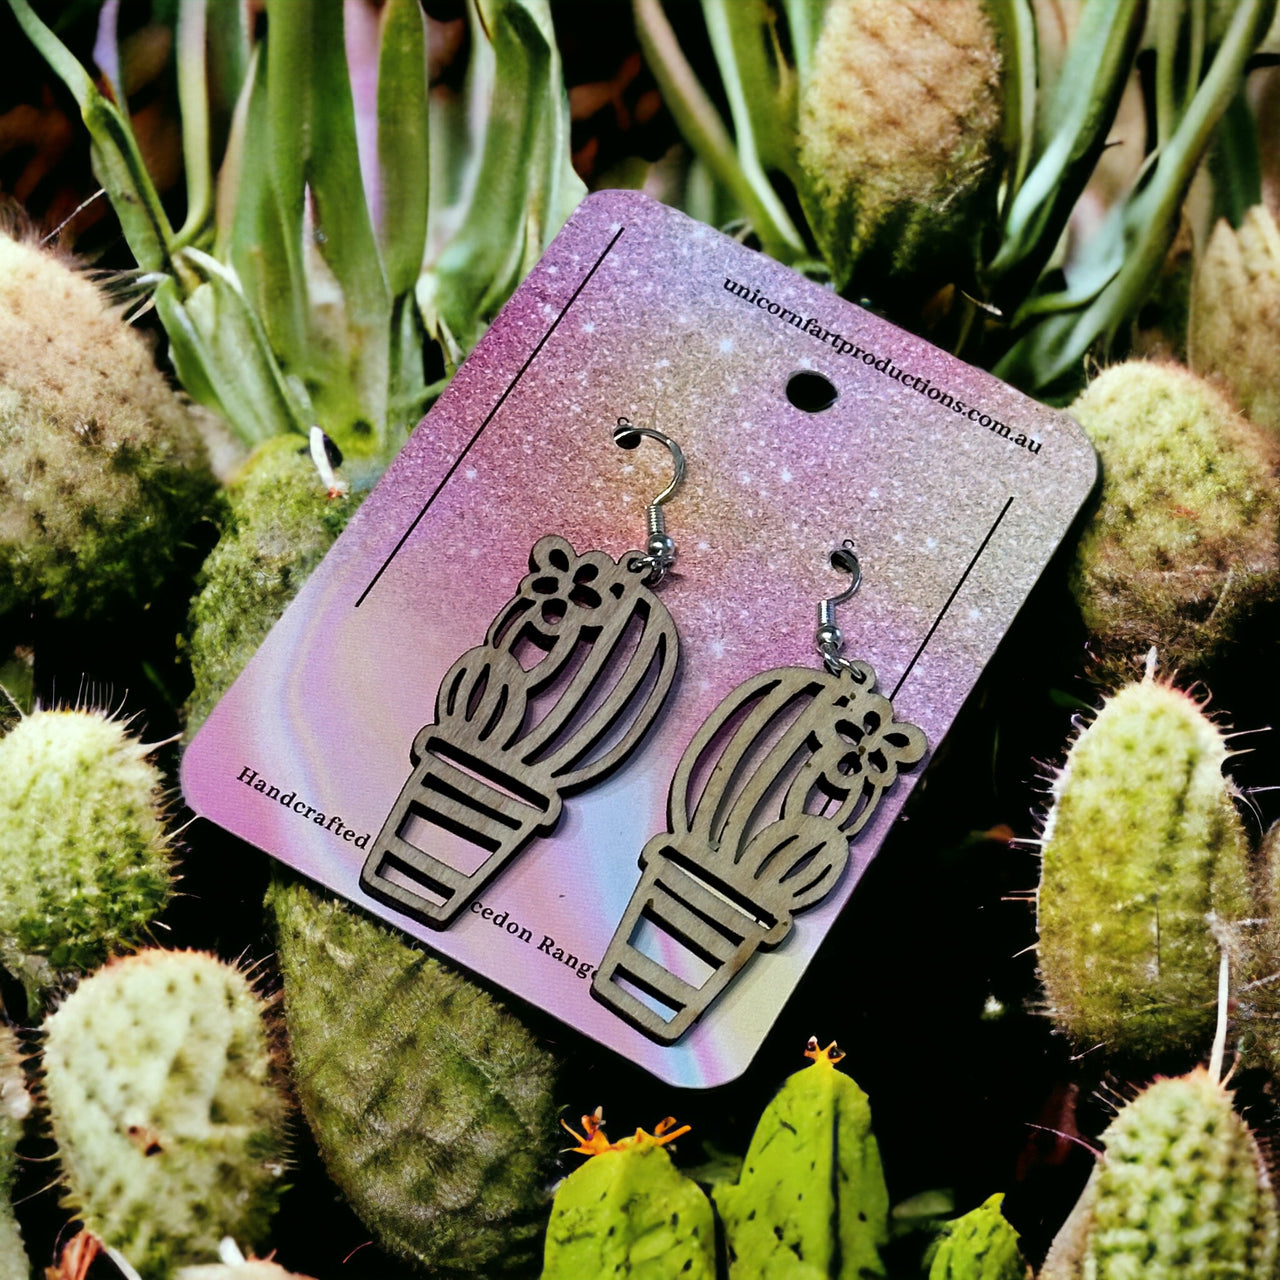 Wooden Handmade earrings crafted from sustainable timber - Cactus 2